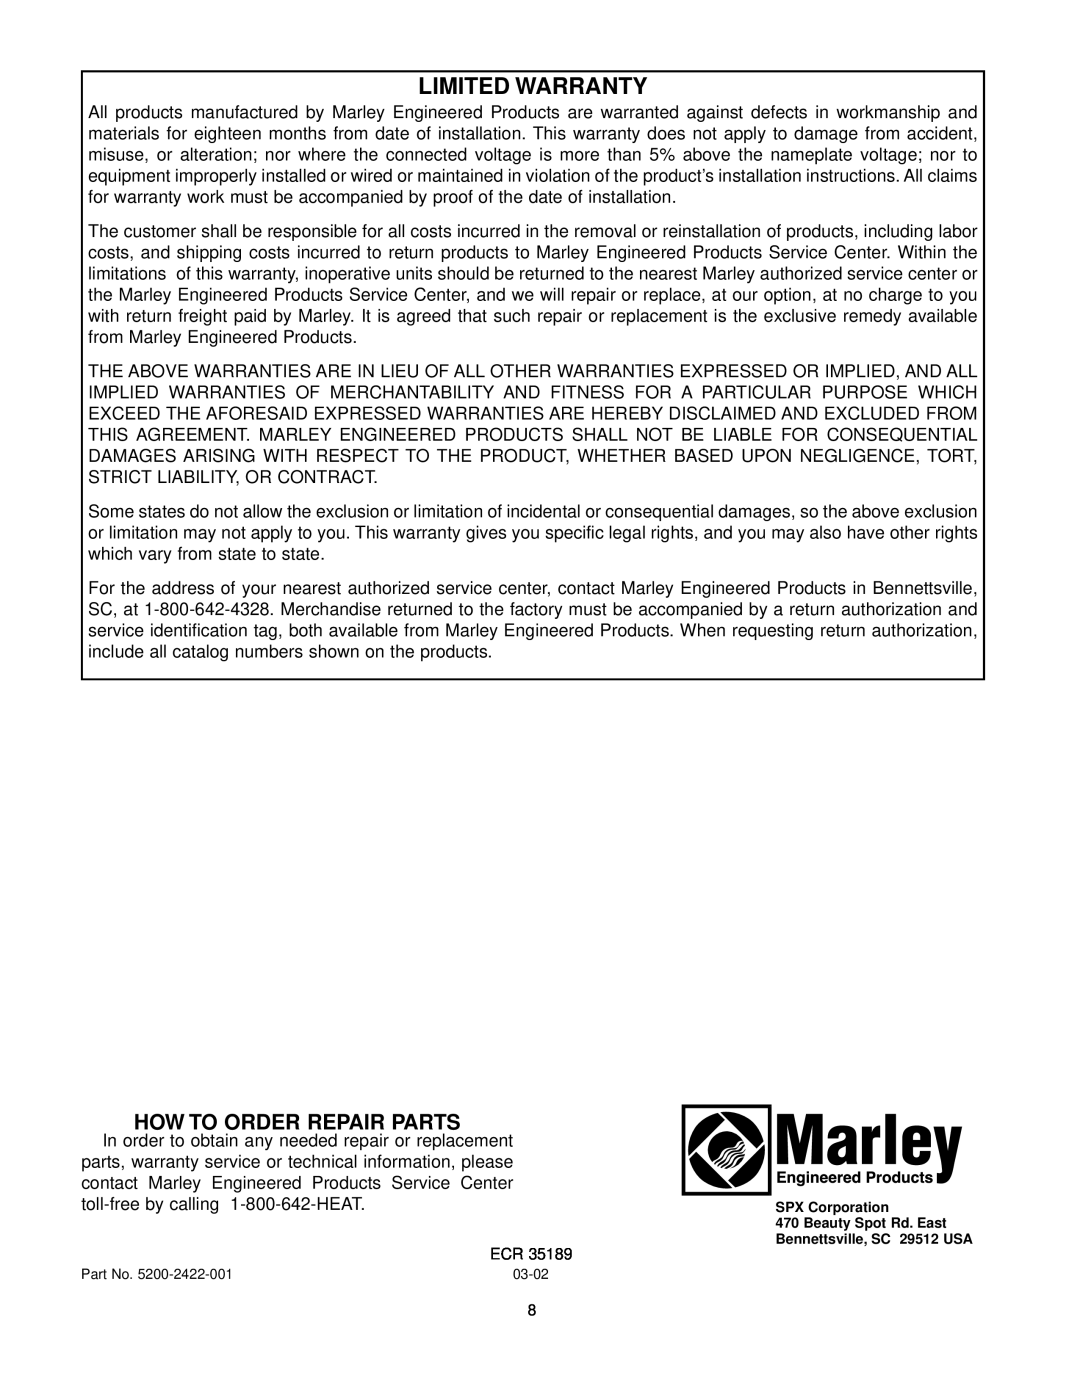 Marley Engineered Products E4812-1125HFD Limited Warranty, How To Order Repair Parts, Strict Liability, Or Contract 